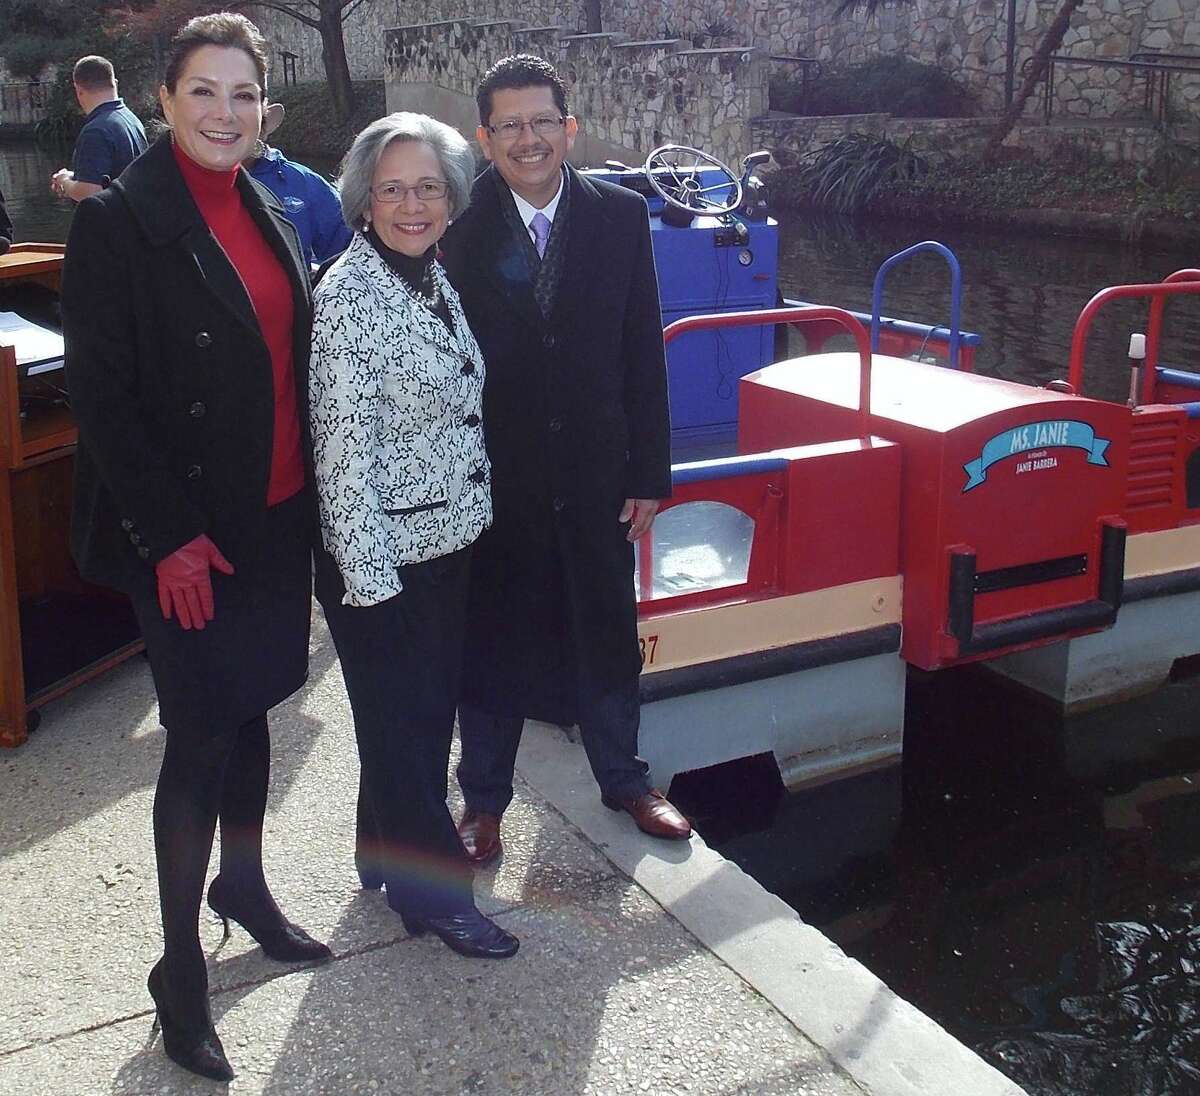 JoAnn Boone (from left), Janie Barerra and Richard Perez, president of the Greater San Antonio Chamber of Commerce, gather at the chamber's River Walk bank to christen the new barge, "The Ms. Janie."